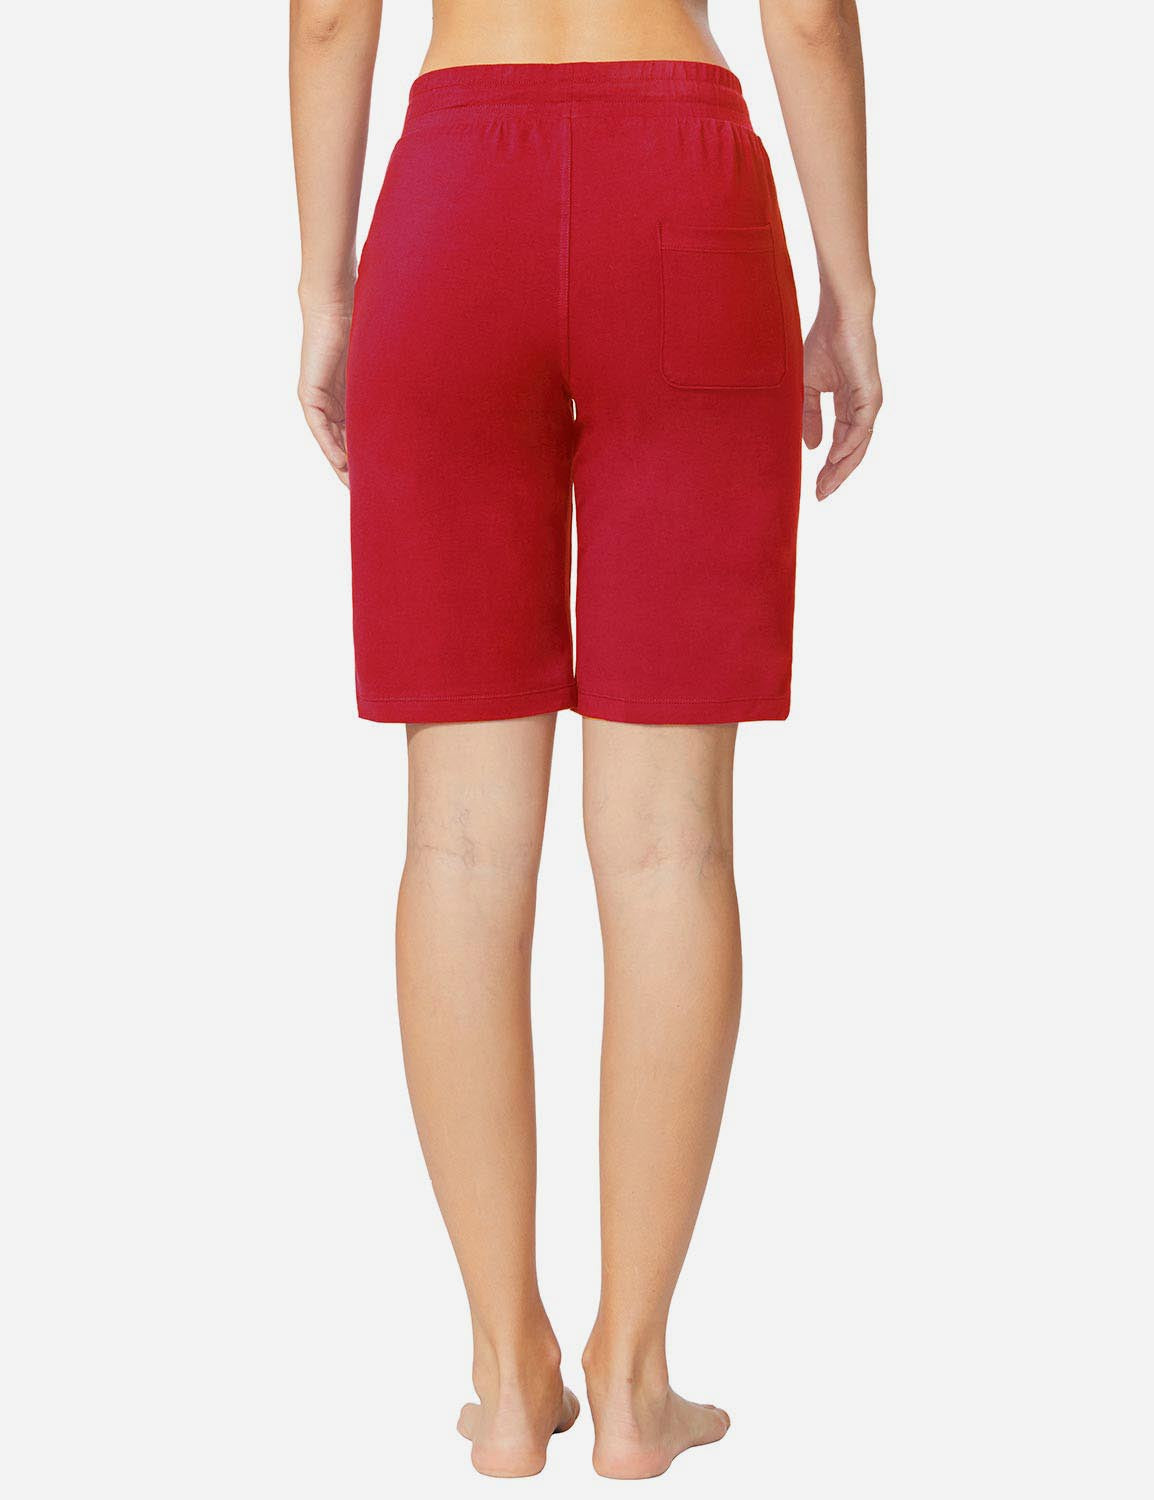 Baleaf Women's Mid-Rise Cotton Pocketed Bermuda Shorts abh104 Rose Red Back